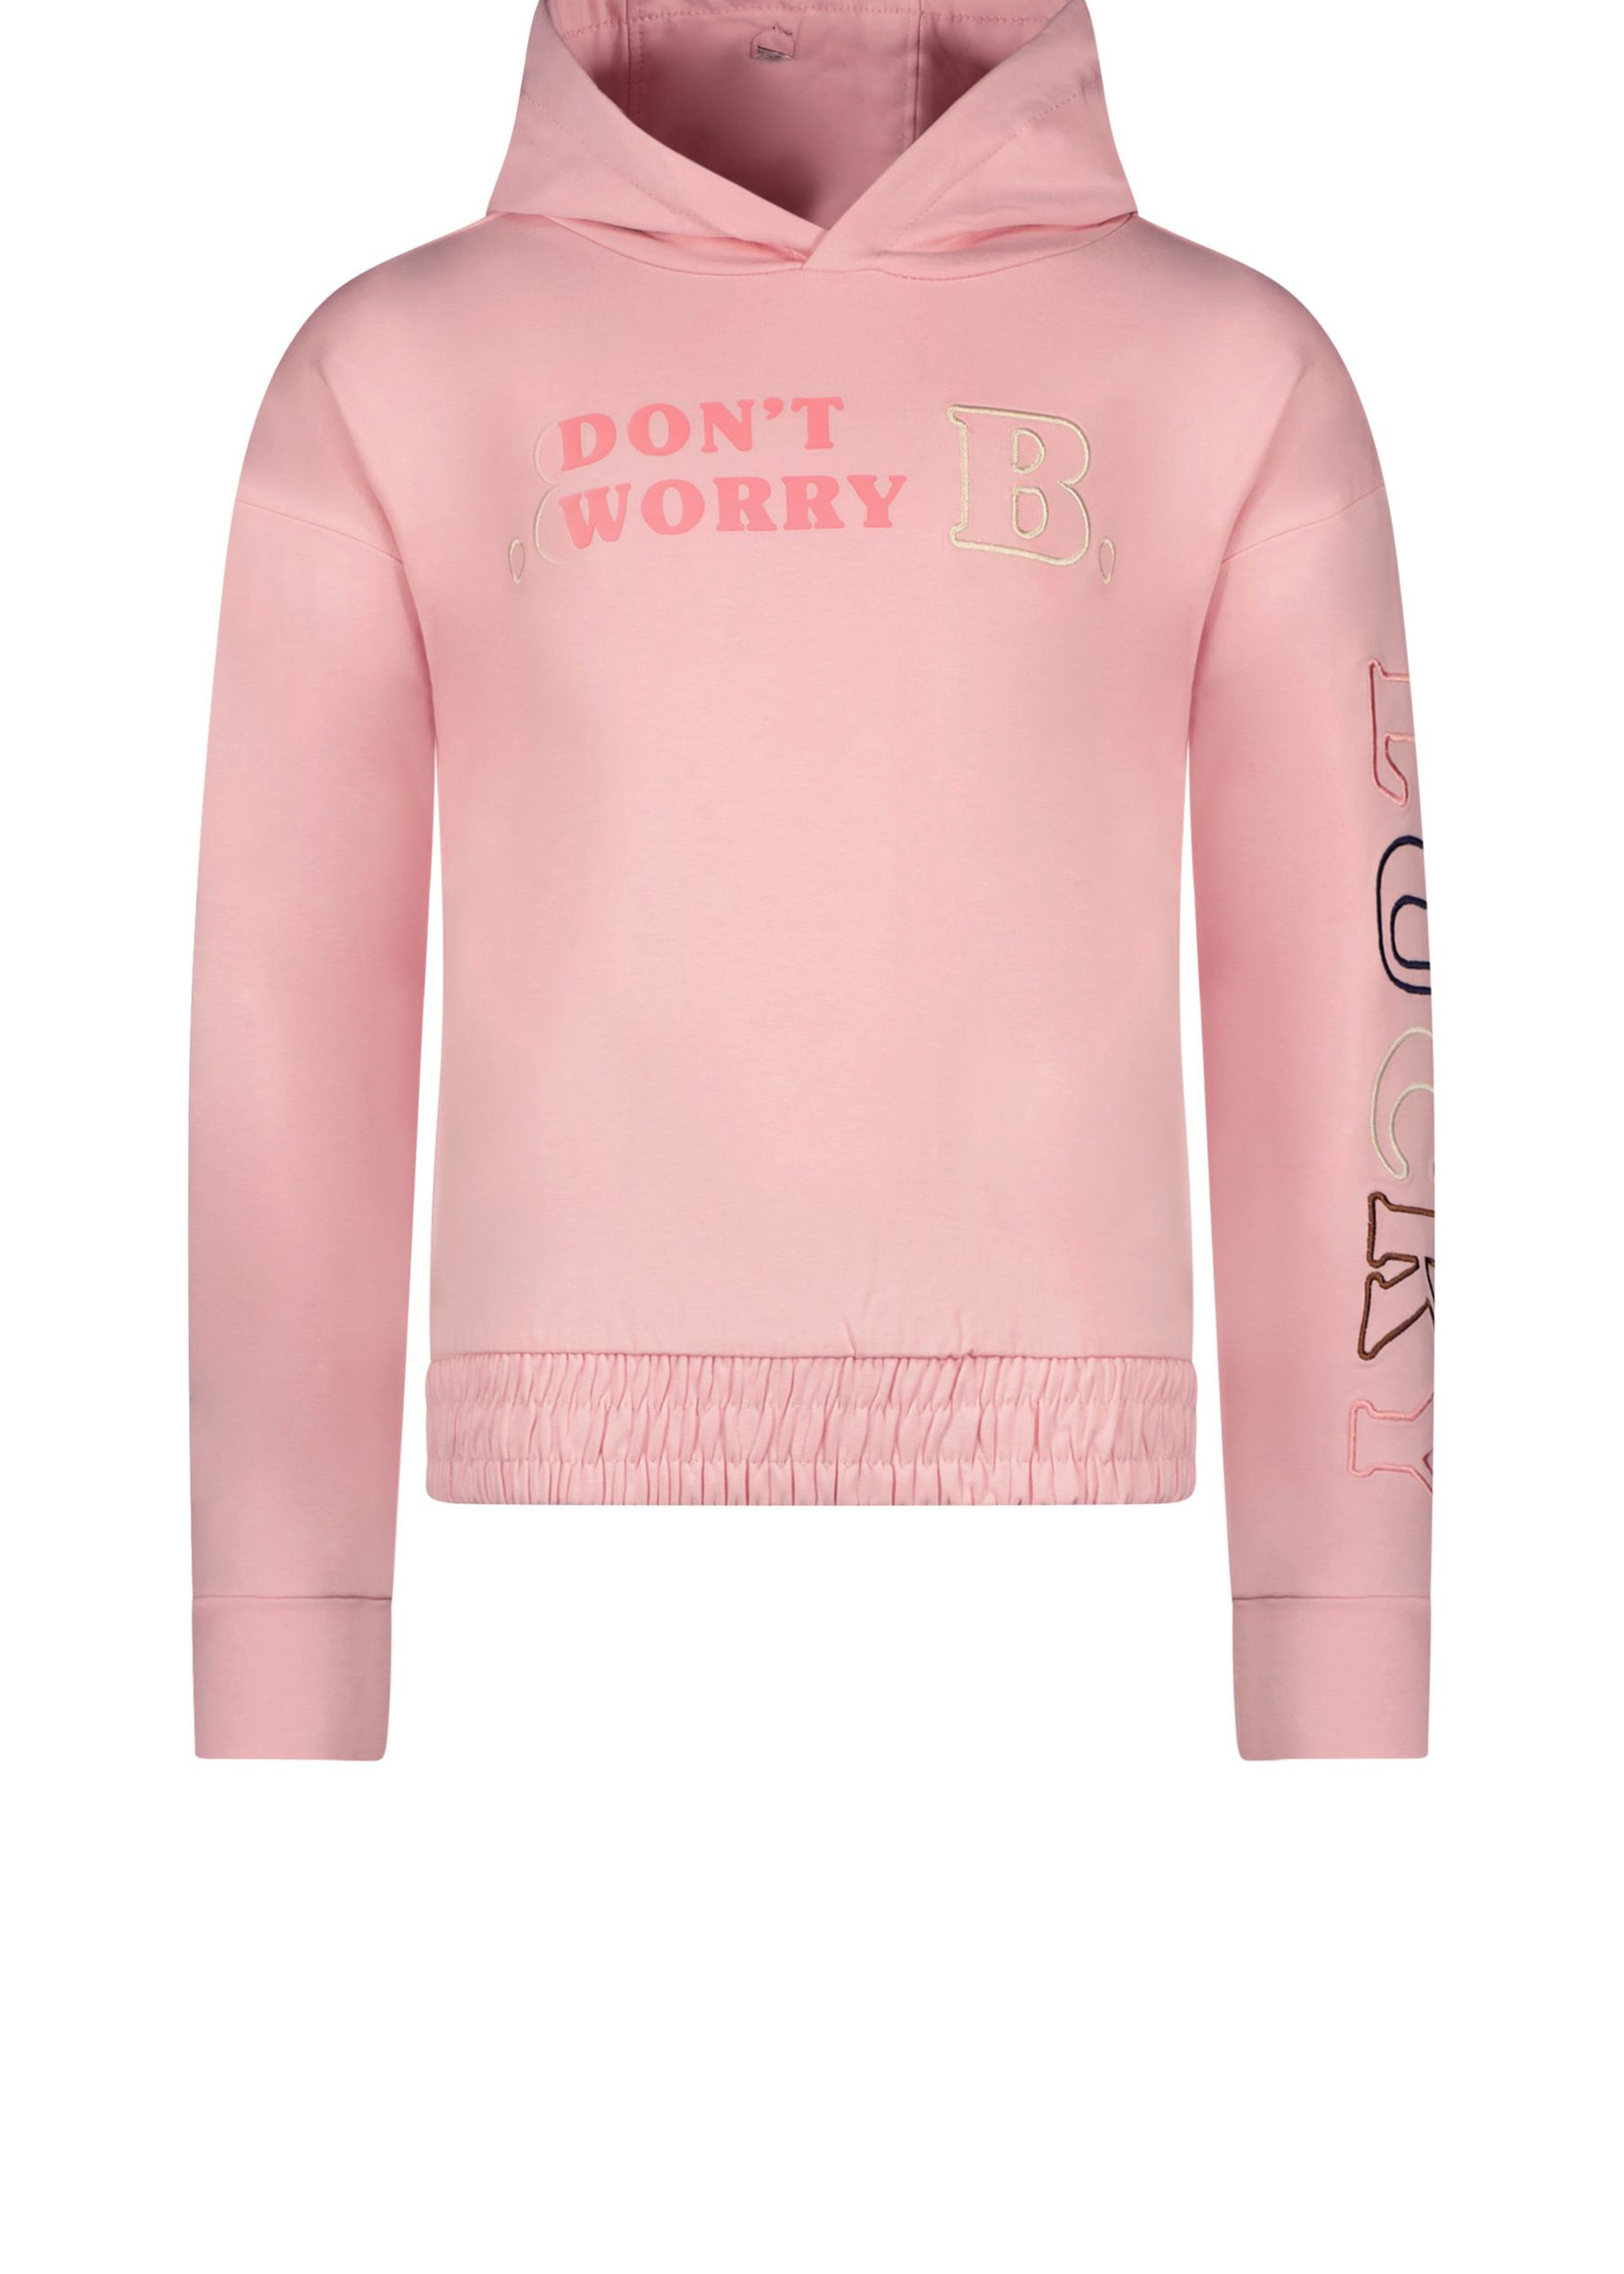 B-Nosy Girls hooded sweater with embroidery on front and sleeve, Coral blush